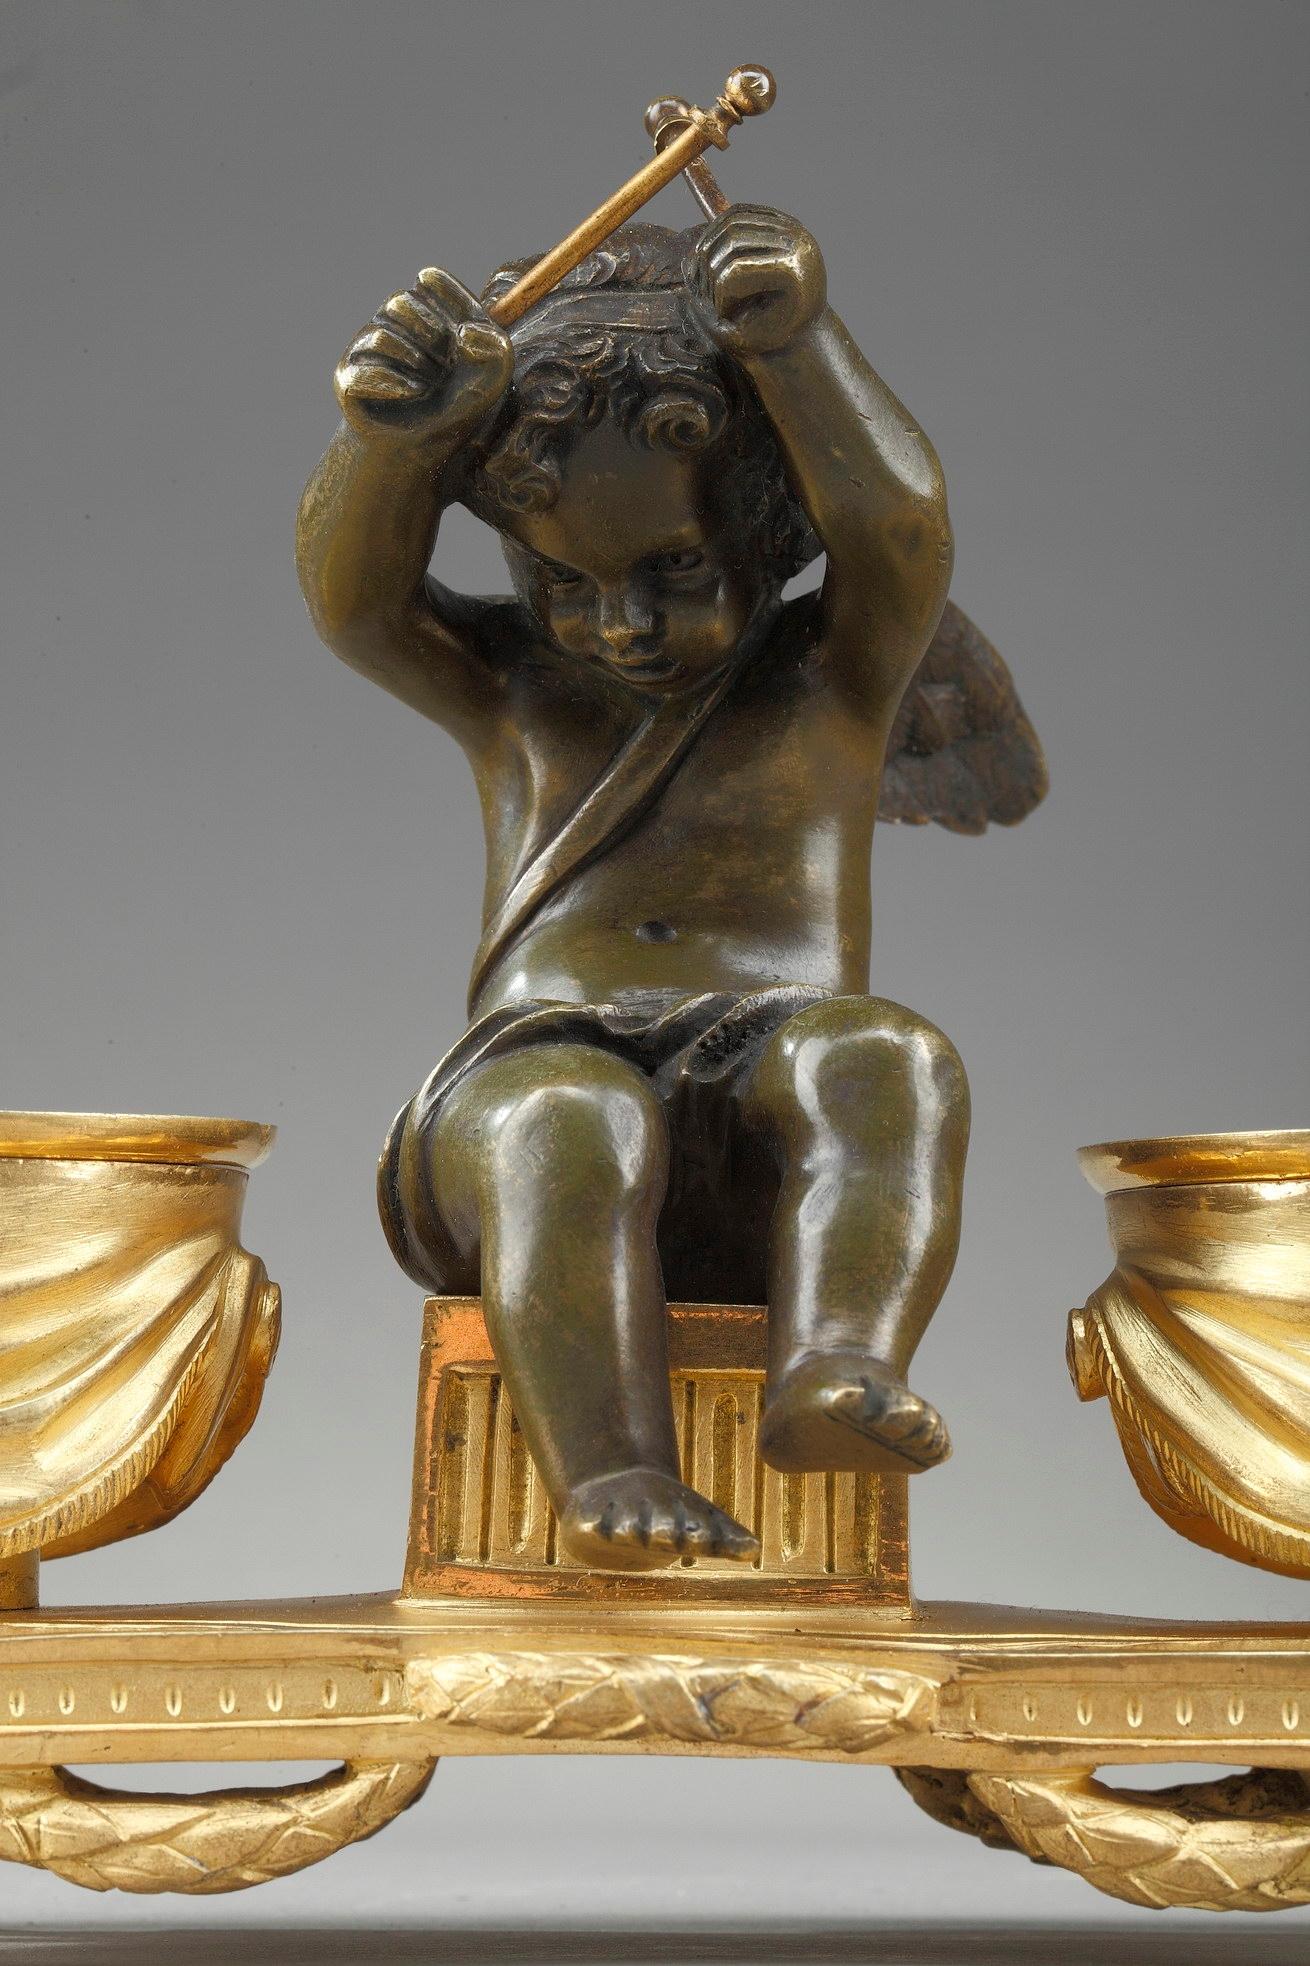 Crafted of gilt and patinated bronze, this small Louis XVI-style inkwell features a winged Cupid playing timbales. He is sitting on a stool, flanked by the two timbales decorated with draperies, hiding the inkwells. The putto is resting on an oval